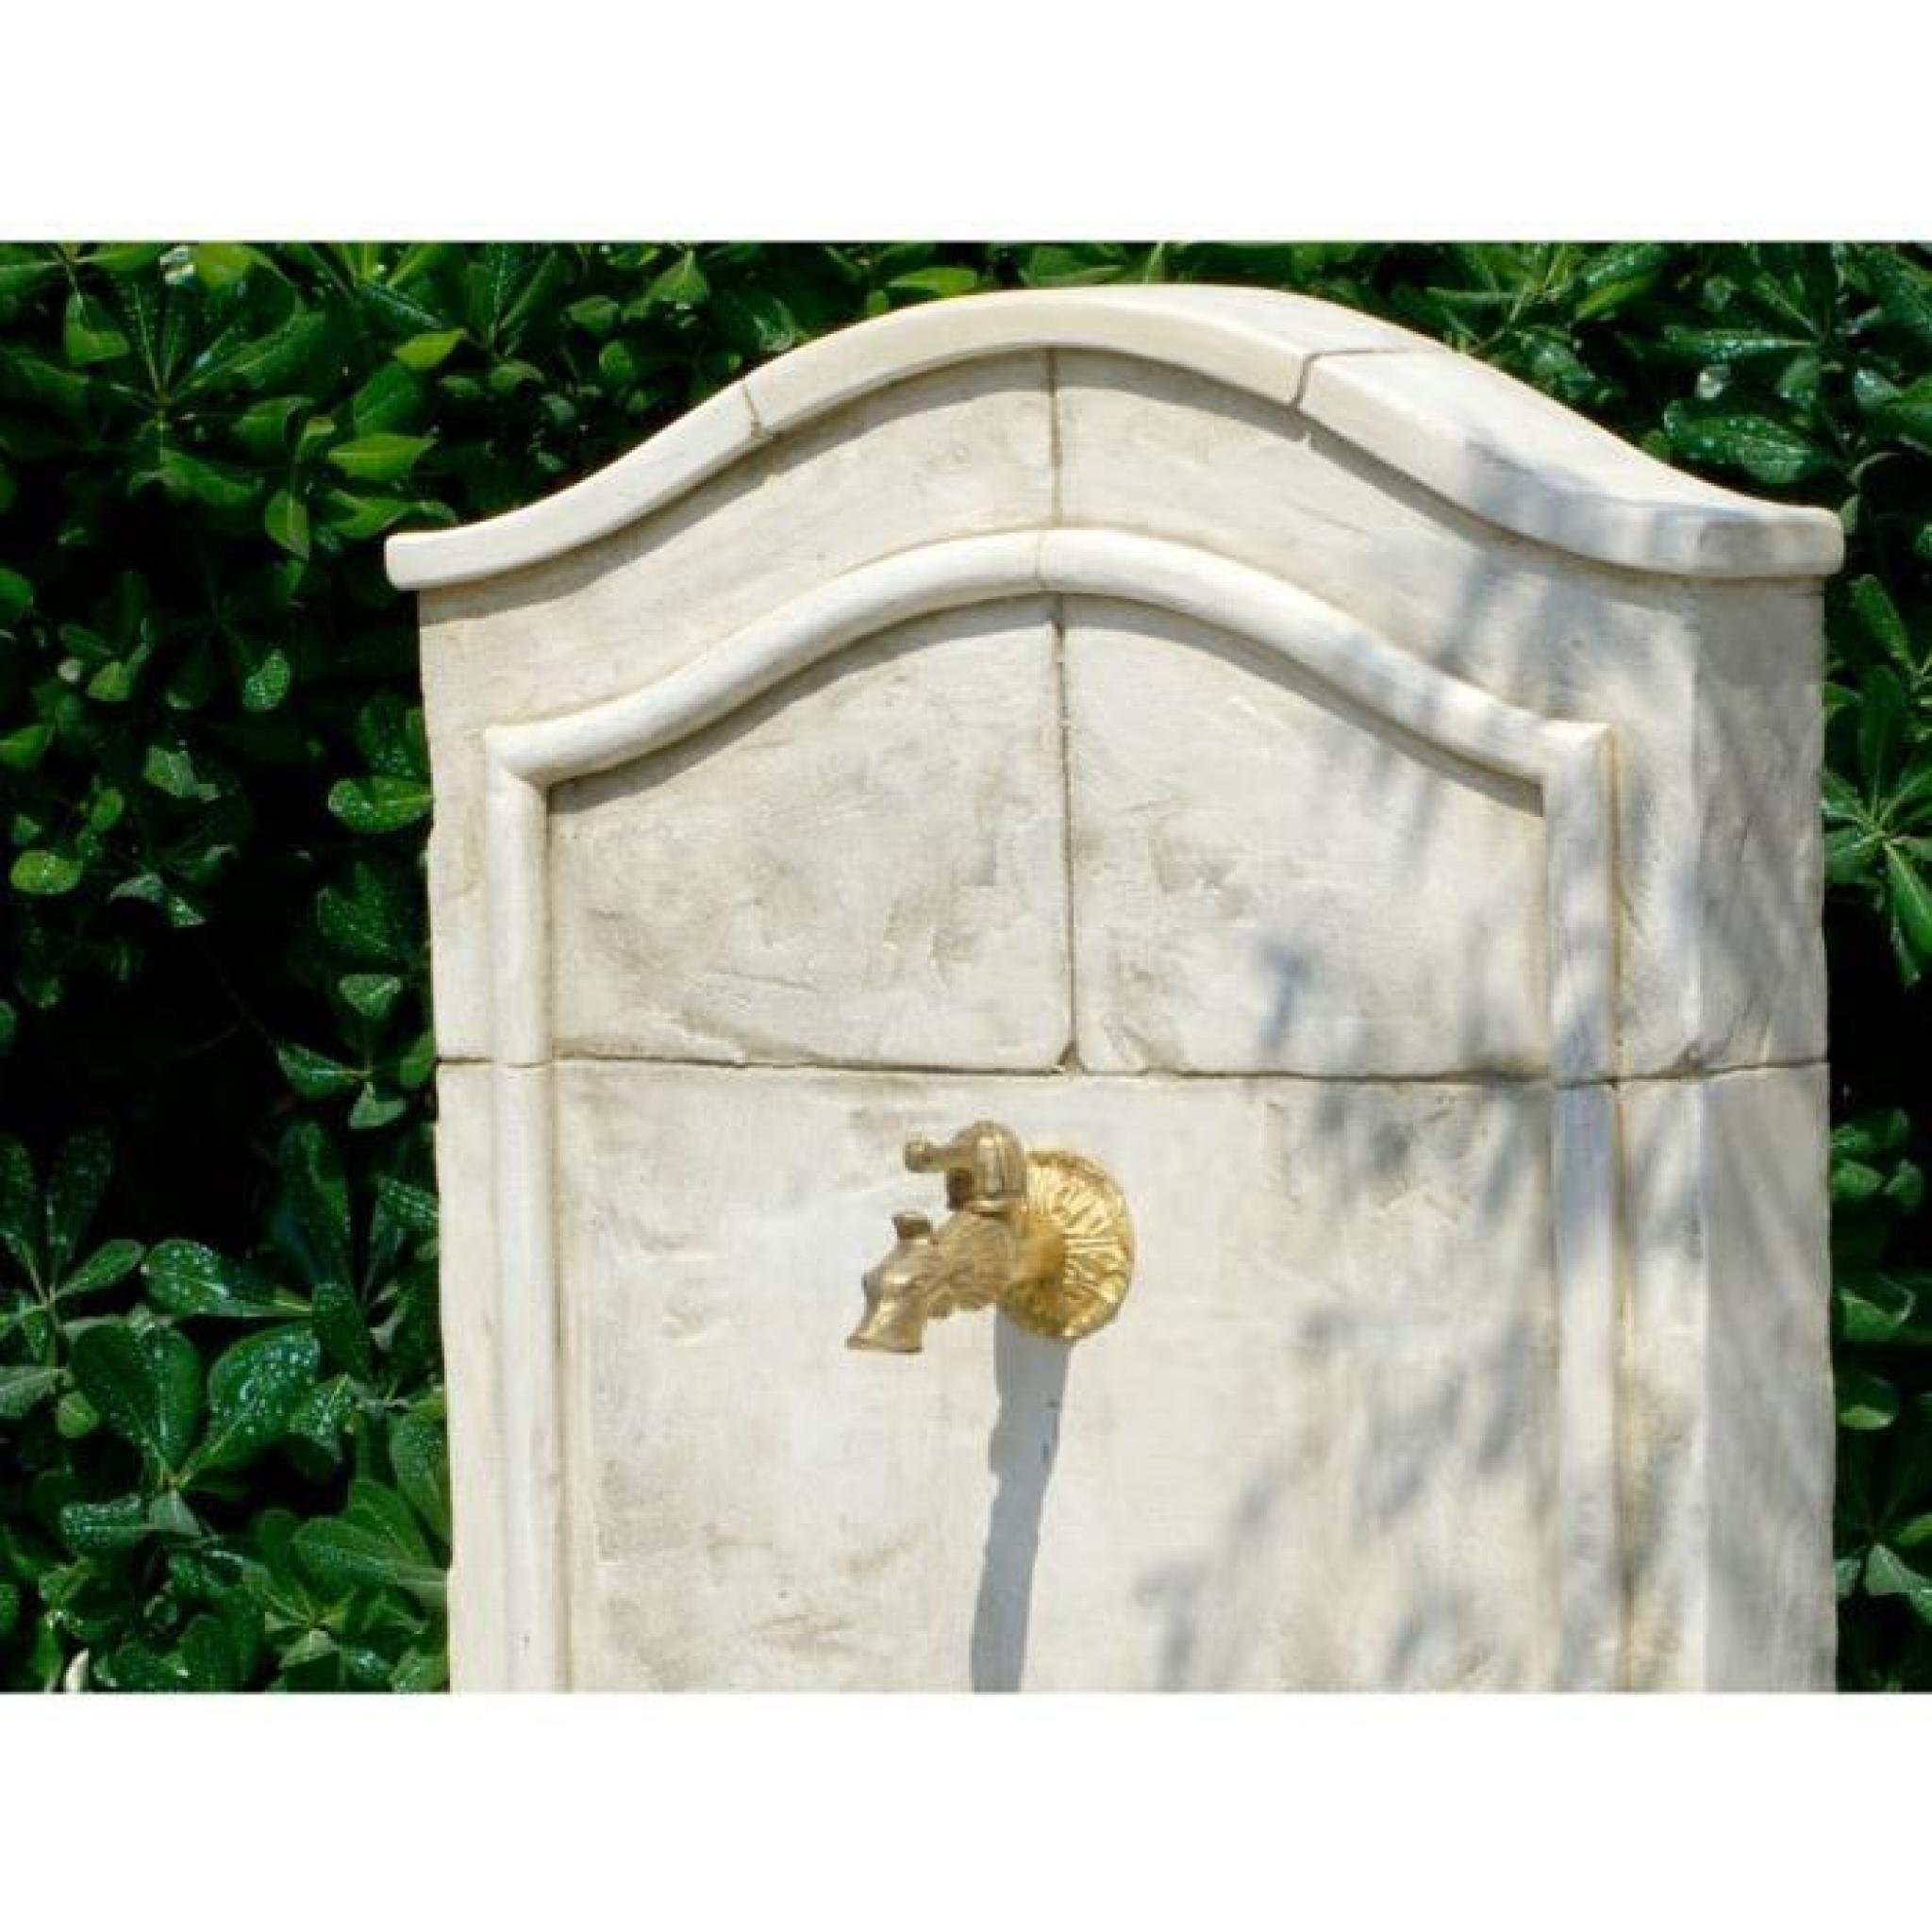 Fontaine Florence - 1.14 x 0.57 x 1.16 m pas cher